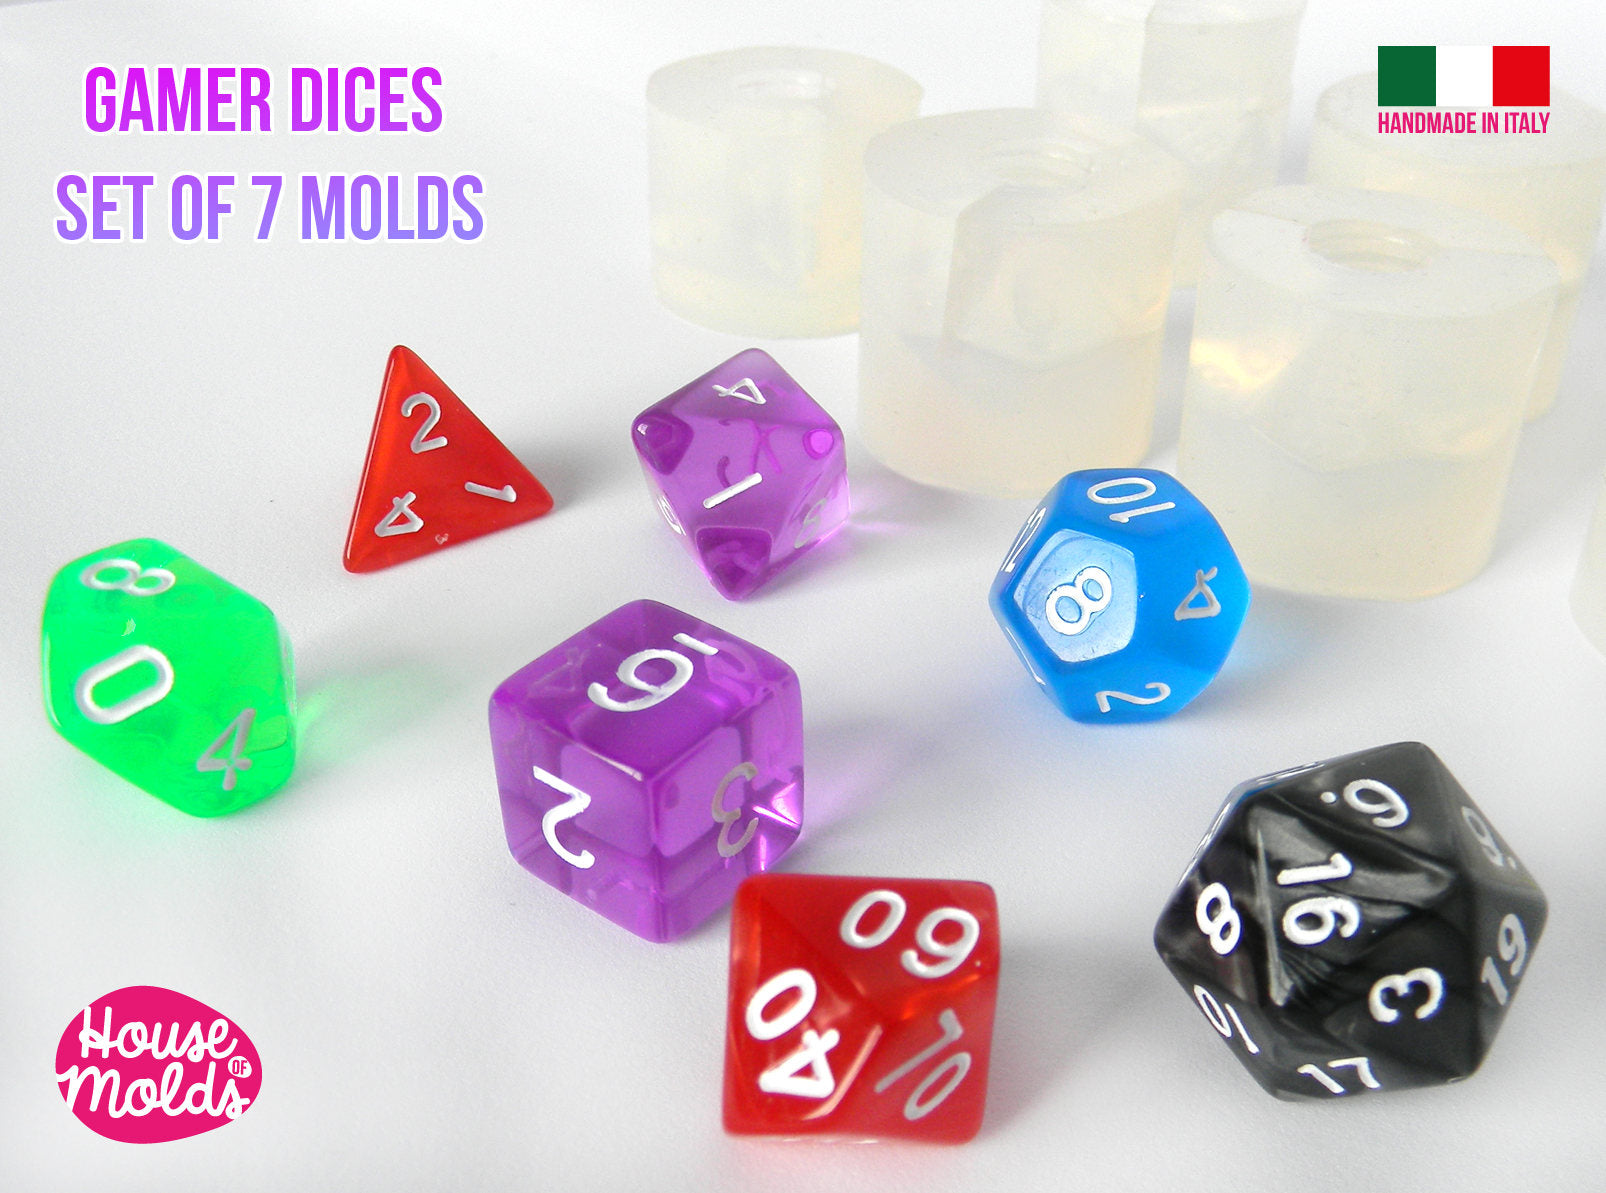 Gamer Dices Set of 7 Clear Silicone Molds - HOUSE OF MOLDS-7 Role